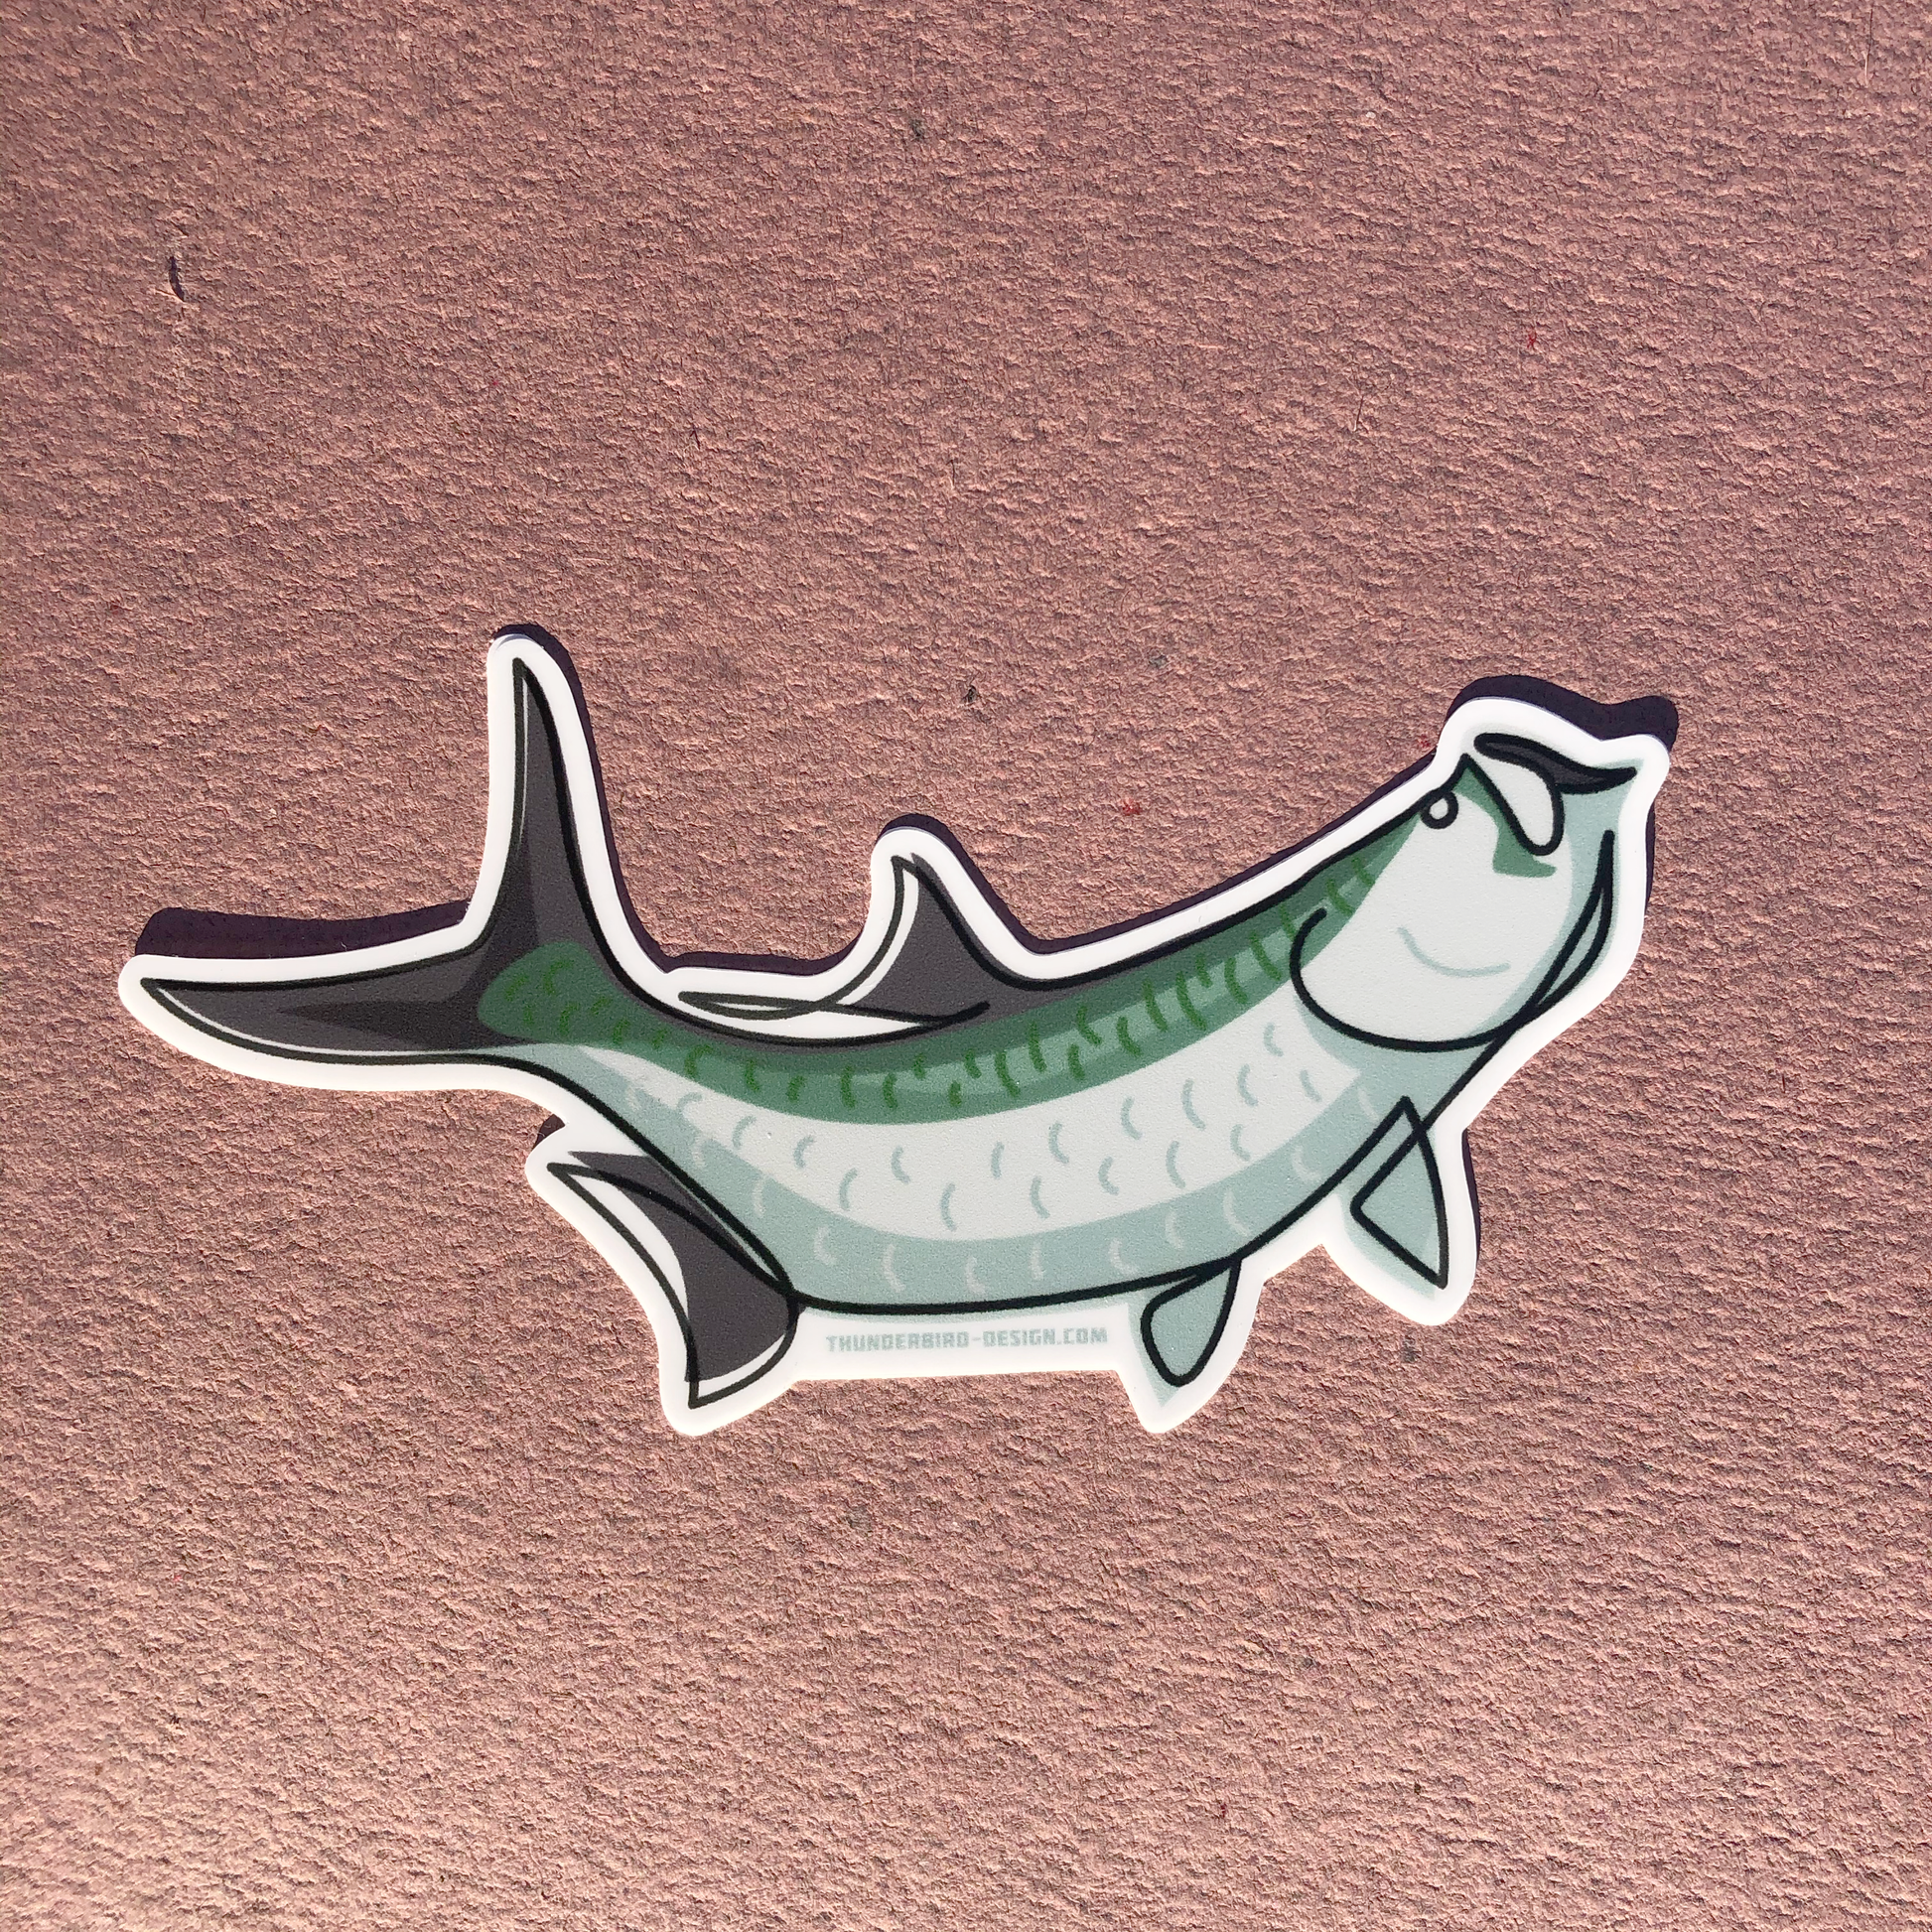 Thunderbird Outdoor SupplyTarpon - Single Line Series Decal w/ Matte FinishTarpon - Single Line Series Decal
4" Inch Drawn, Single Line Contour Illustration of a Tarpon.These weatherproof Matte decals are perfect for your Rod tube, water bottle, tackle box, car window or w